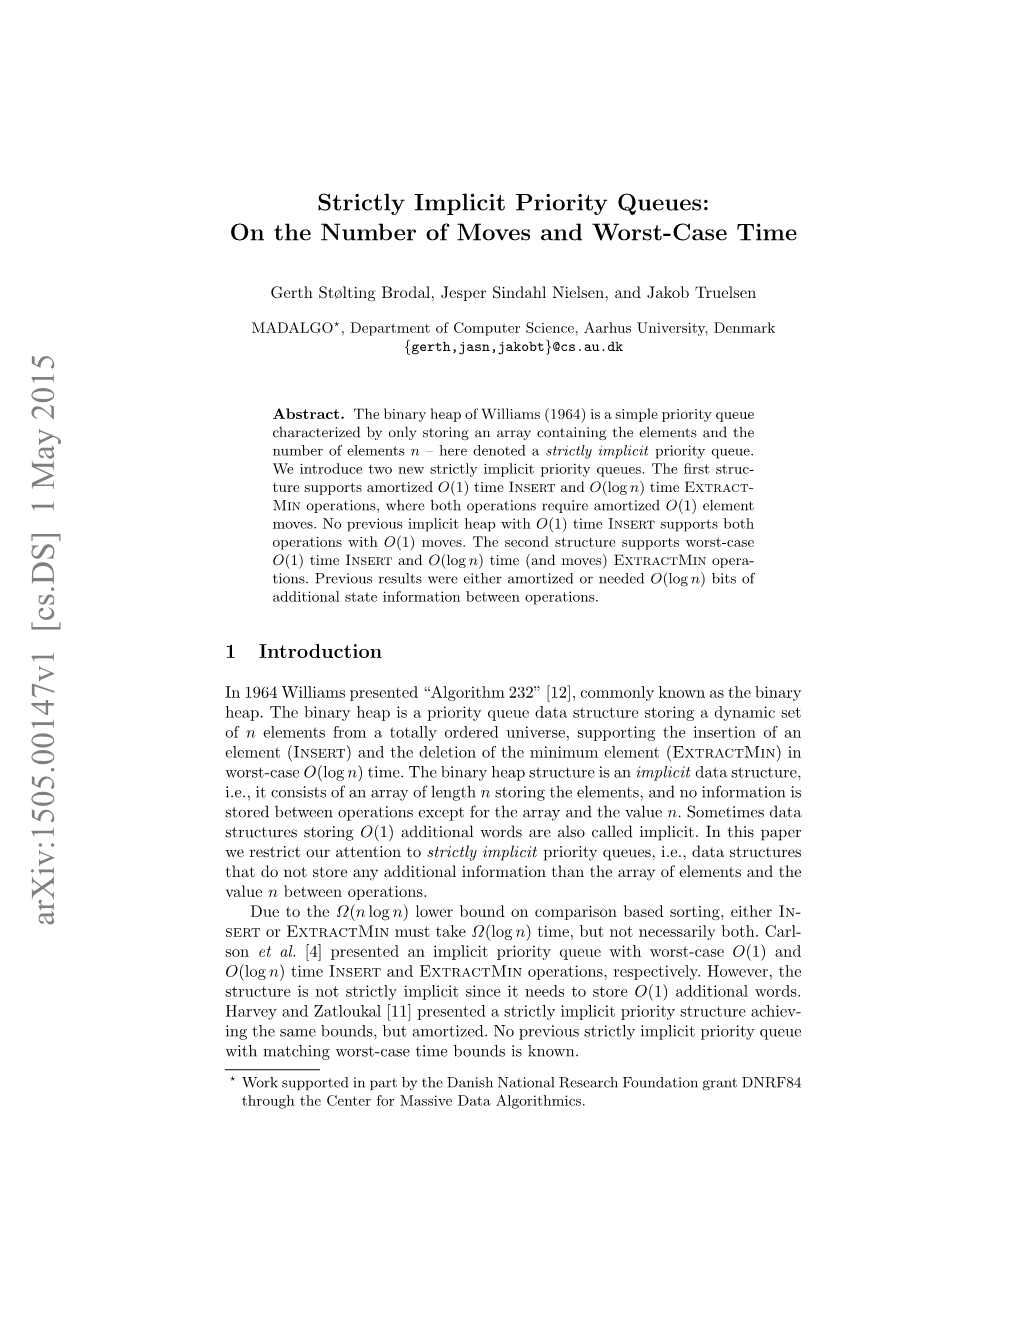 Strictly Implicit Priority Queues: on the Number of Moves and Worst-Case Time